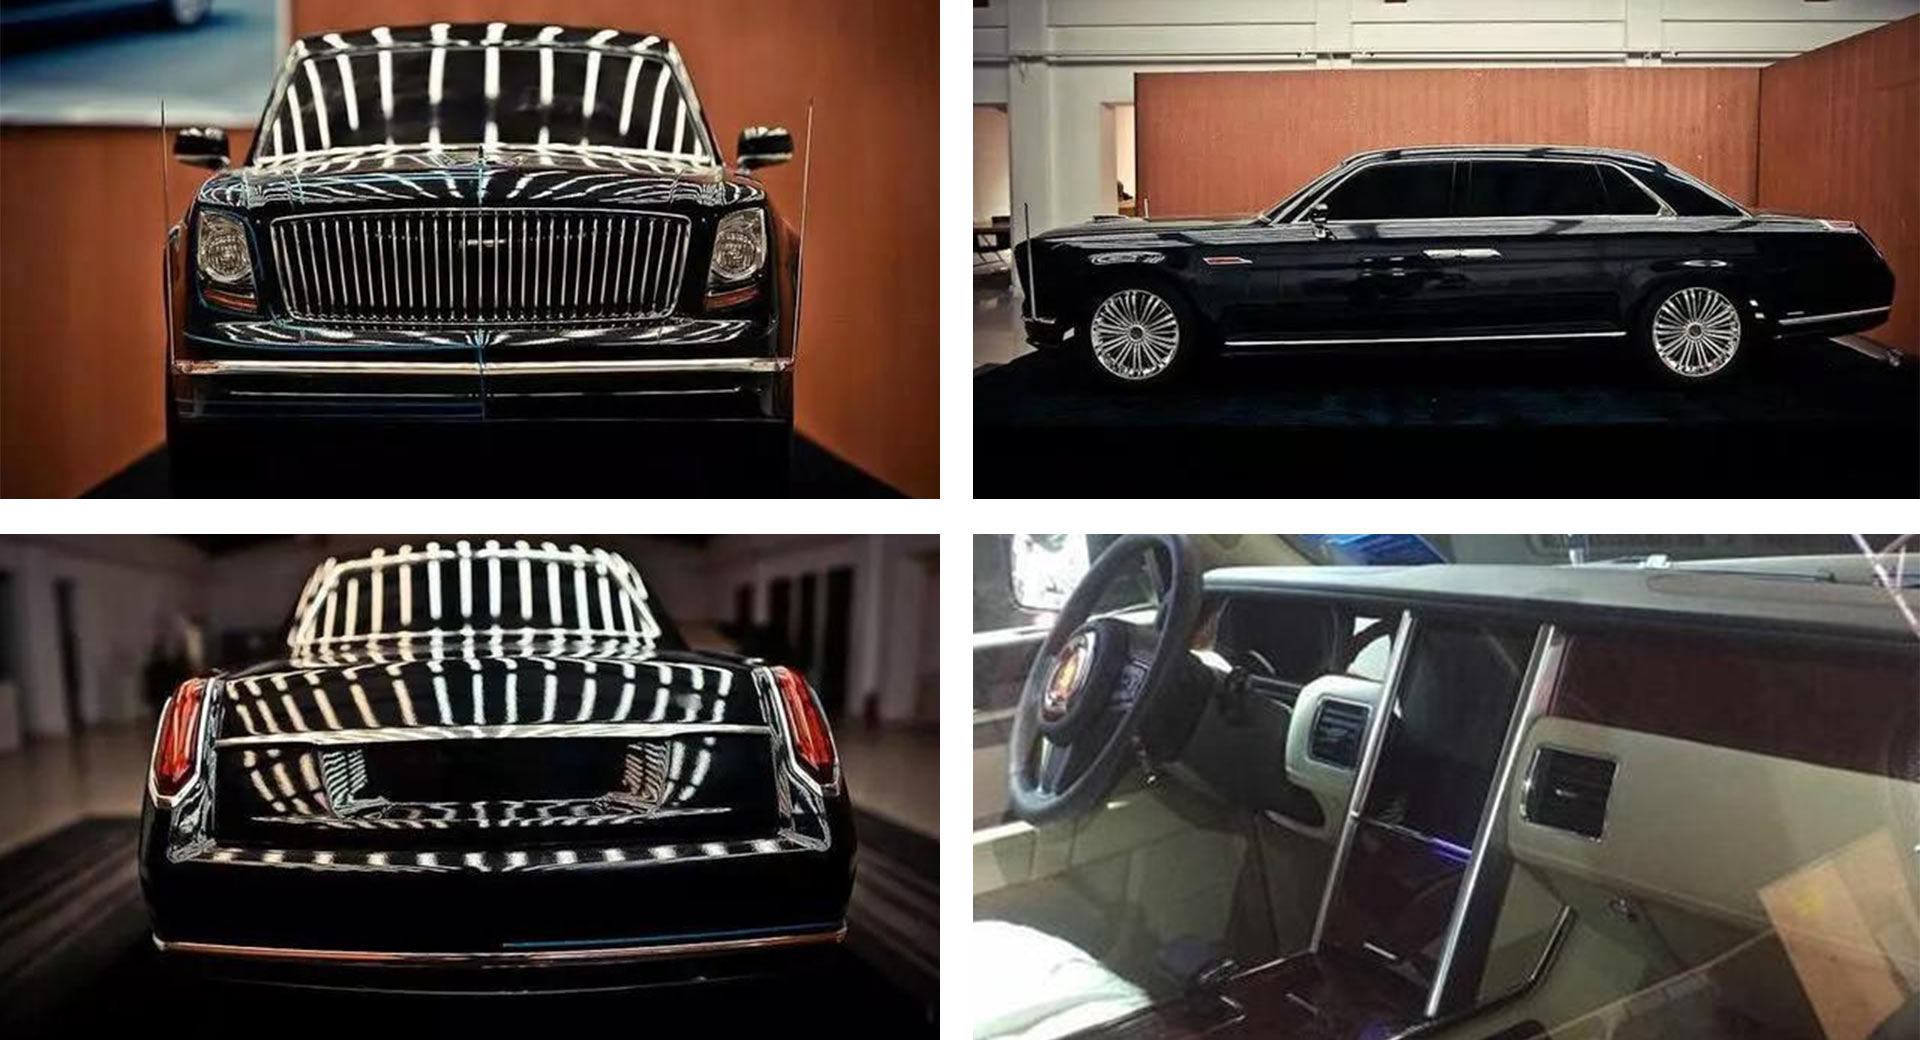 Hongqi L4 Is A New Suicide-Door Luxury Limousine From China